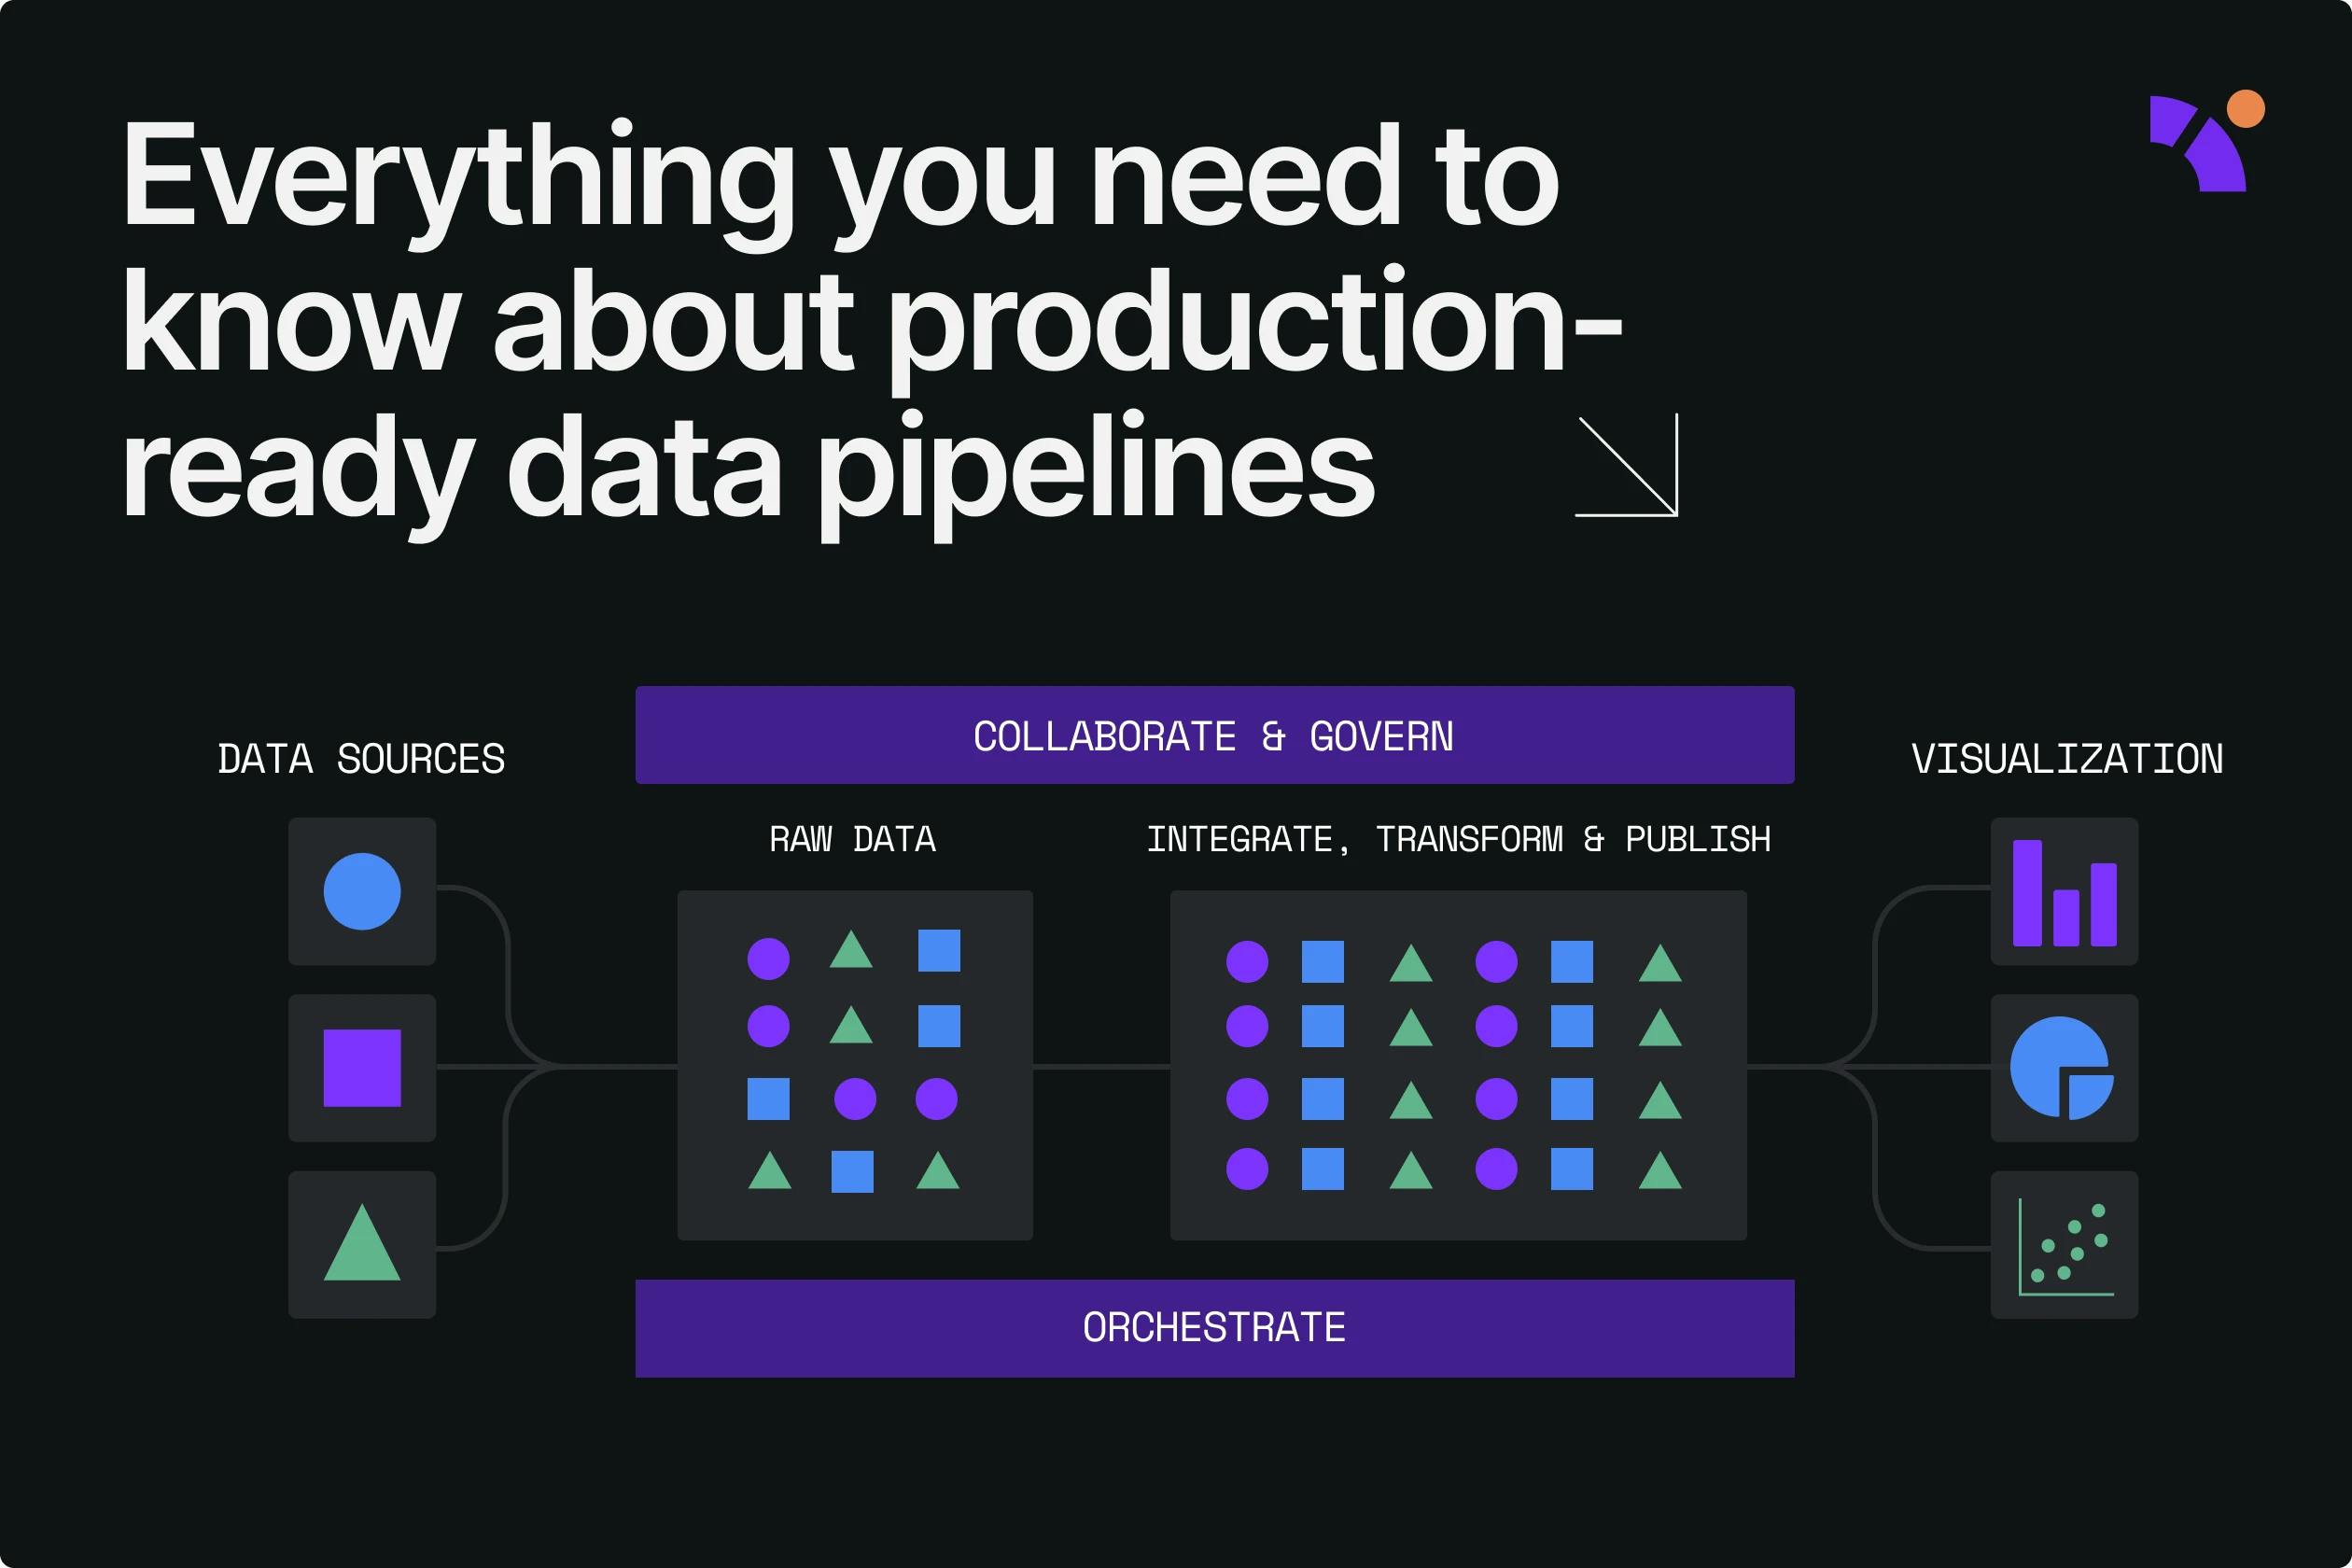 Data pipeline overview